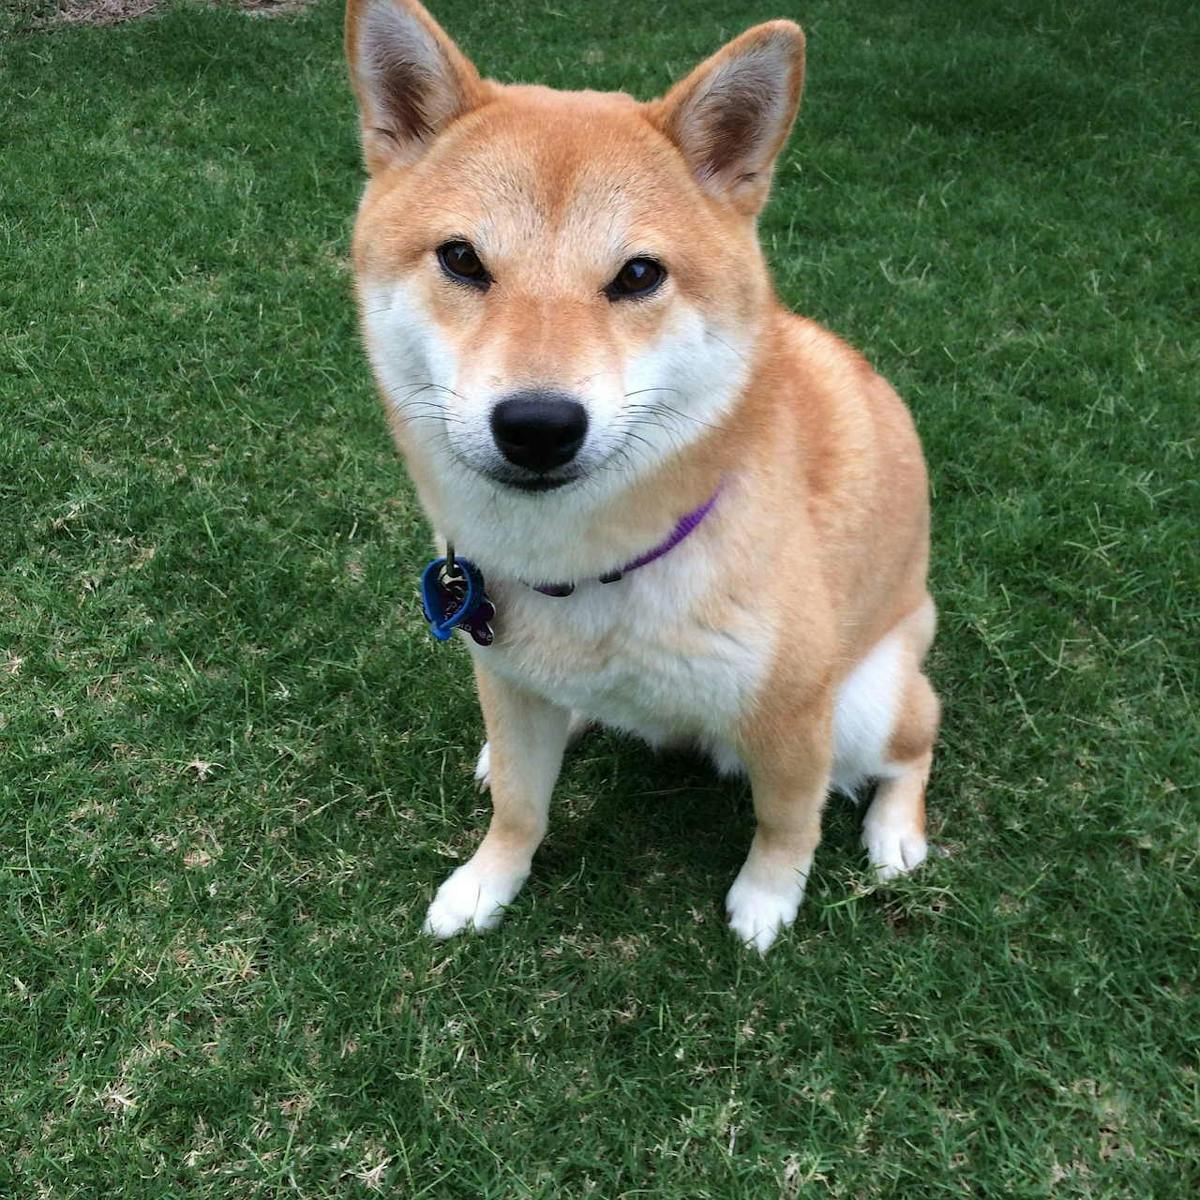 While Cryptos Retrace, SHIBA INU Token Shoots 50% – What’s Happening?